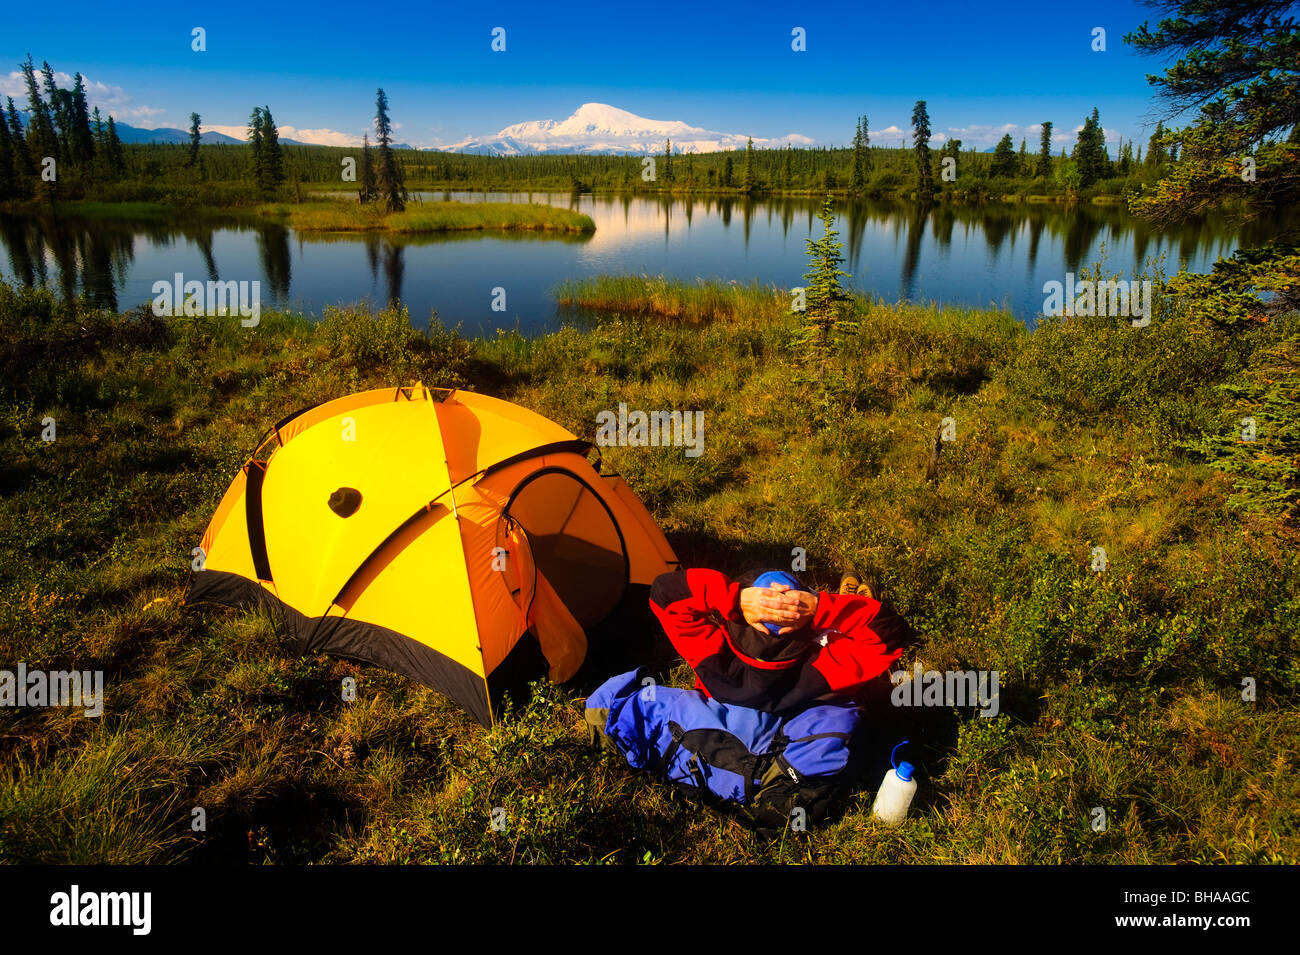 Backpacker enjoys the view of Mount Sanford from his campsite, Wrangell Saint Elias National Park, Southcentral Alaska, Summer Stock Photo